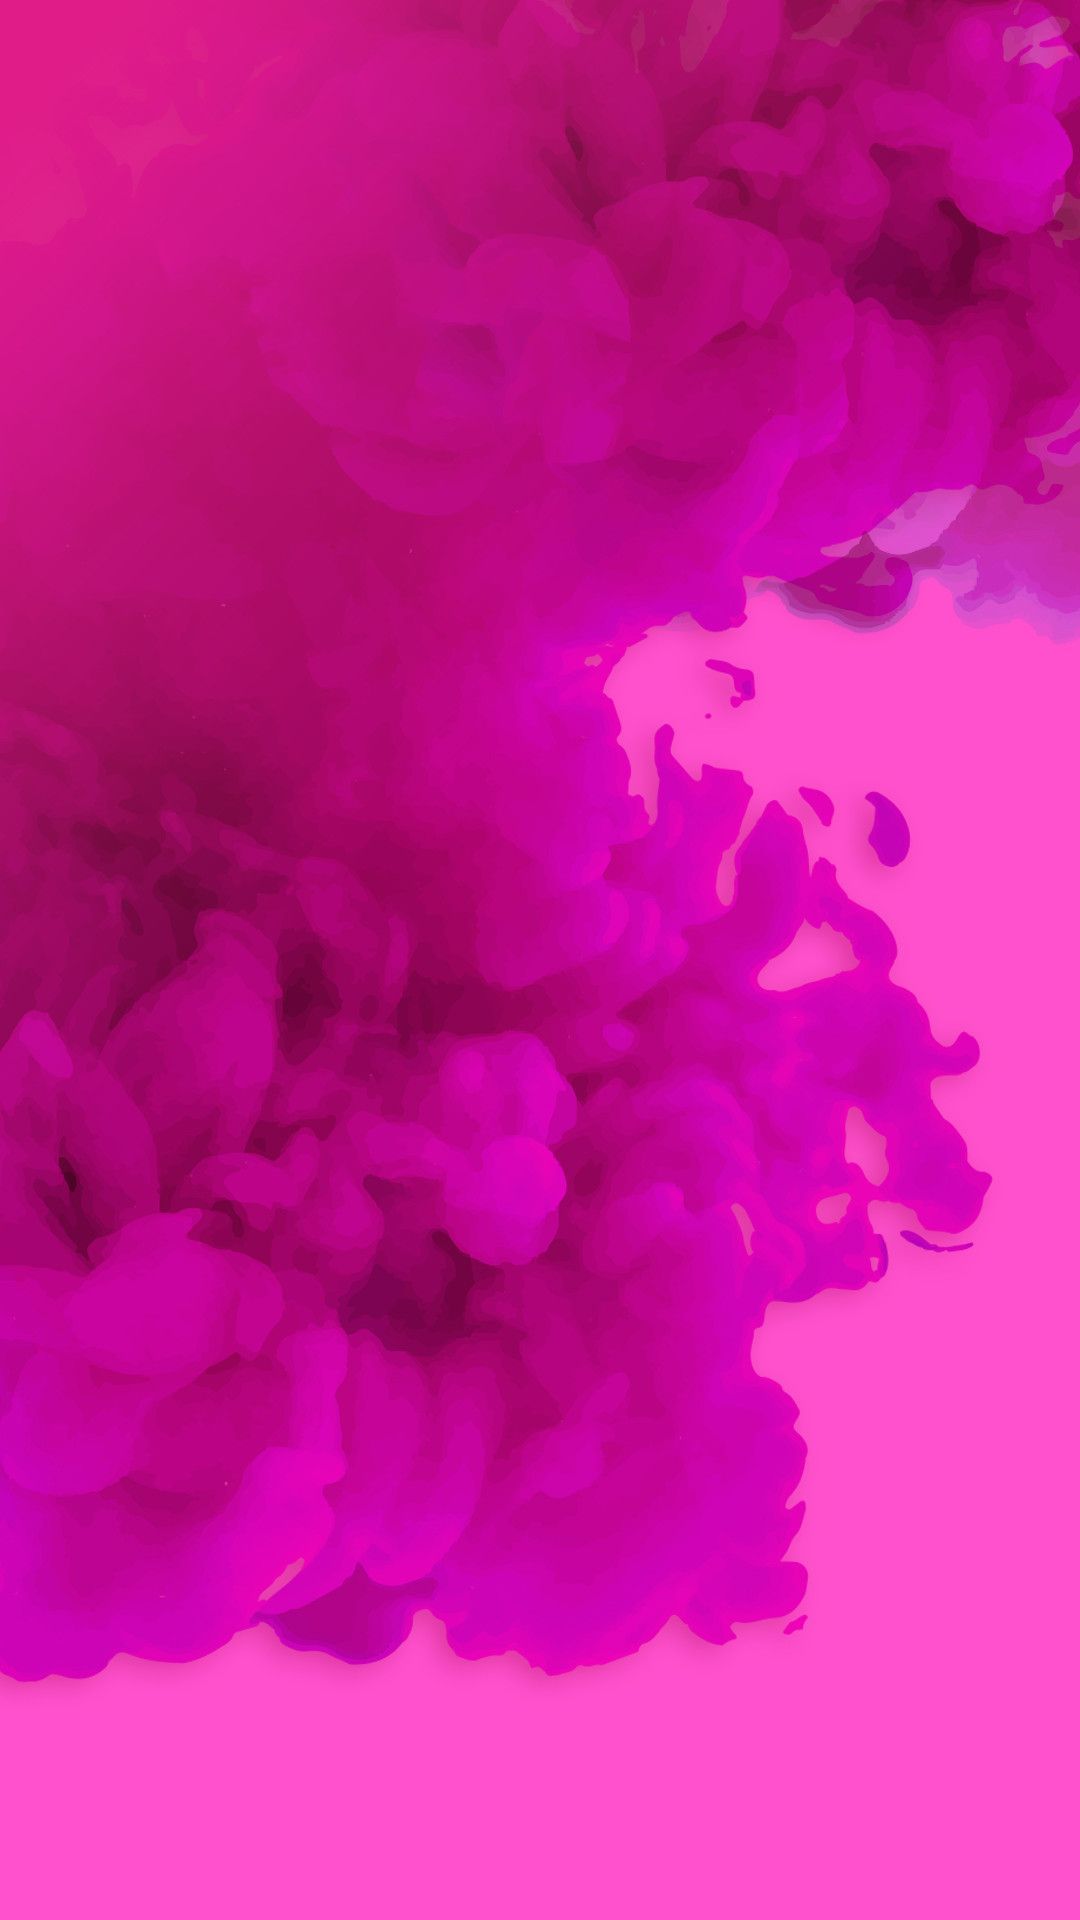 A pink background with flowers and smoke - Pink phone